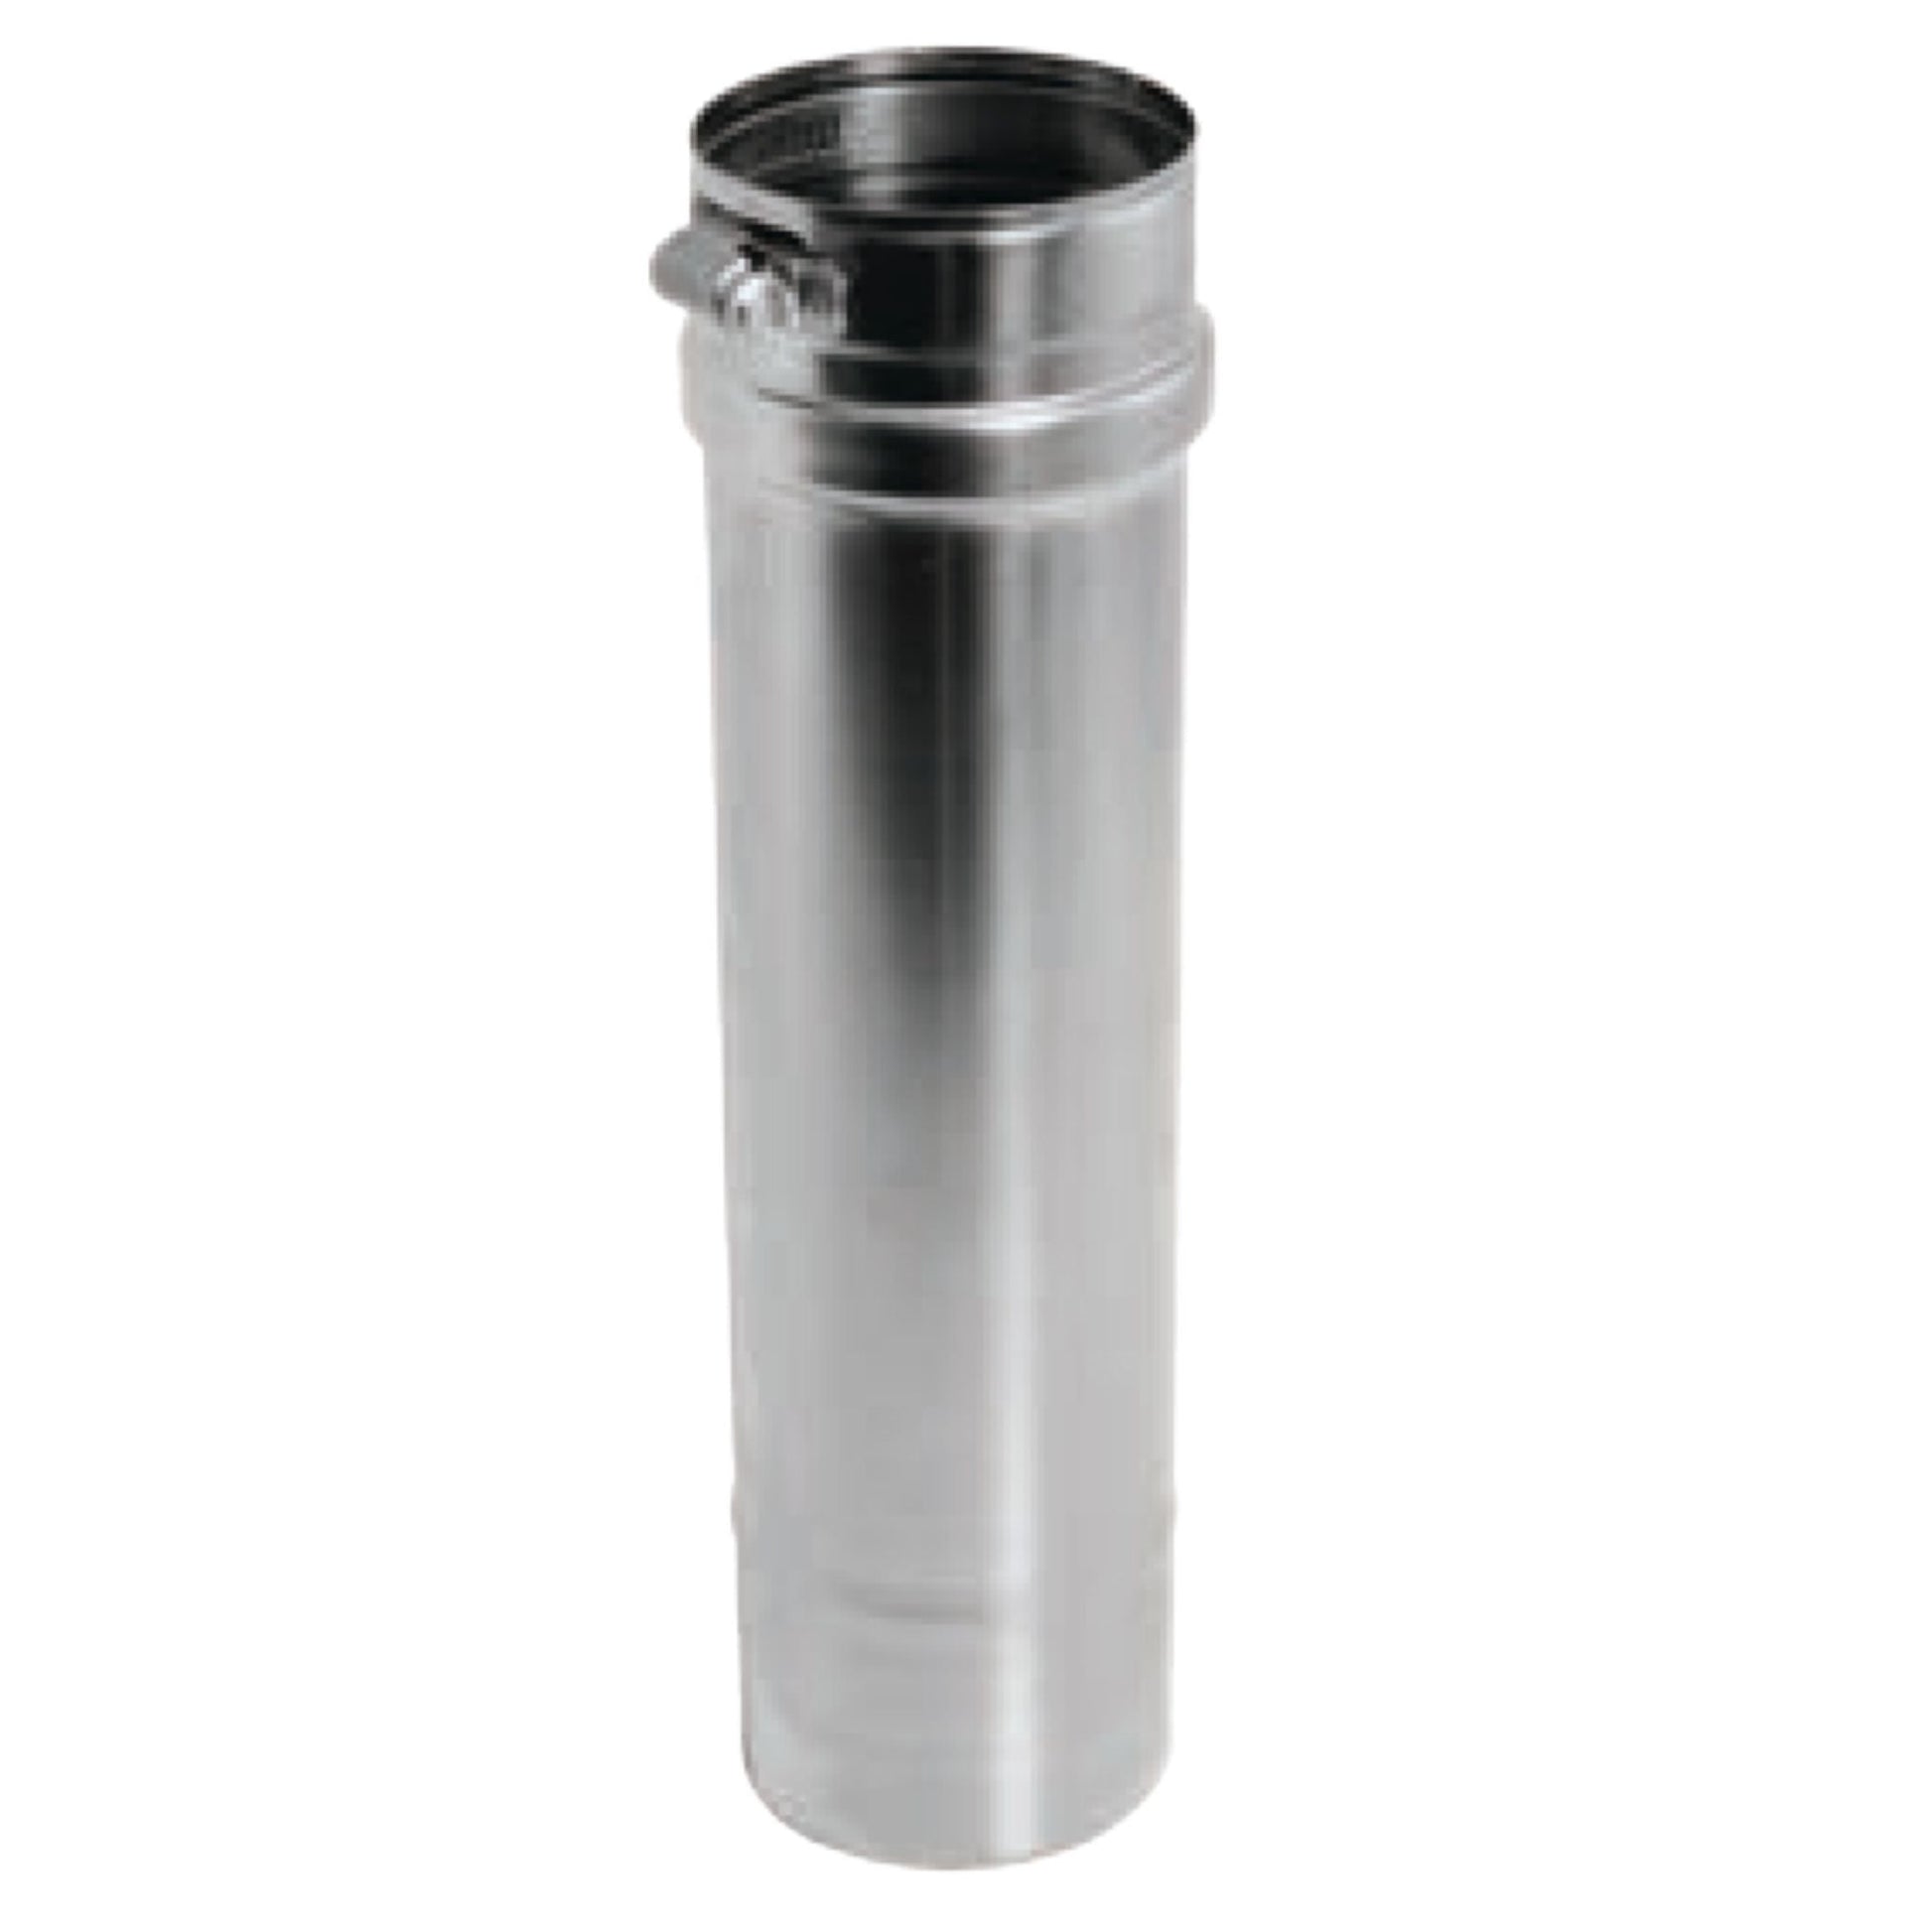 DuraVent FasNSeal 6" x 36" 29-4C Stainless Steel Vent Length